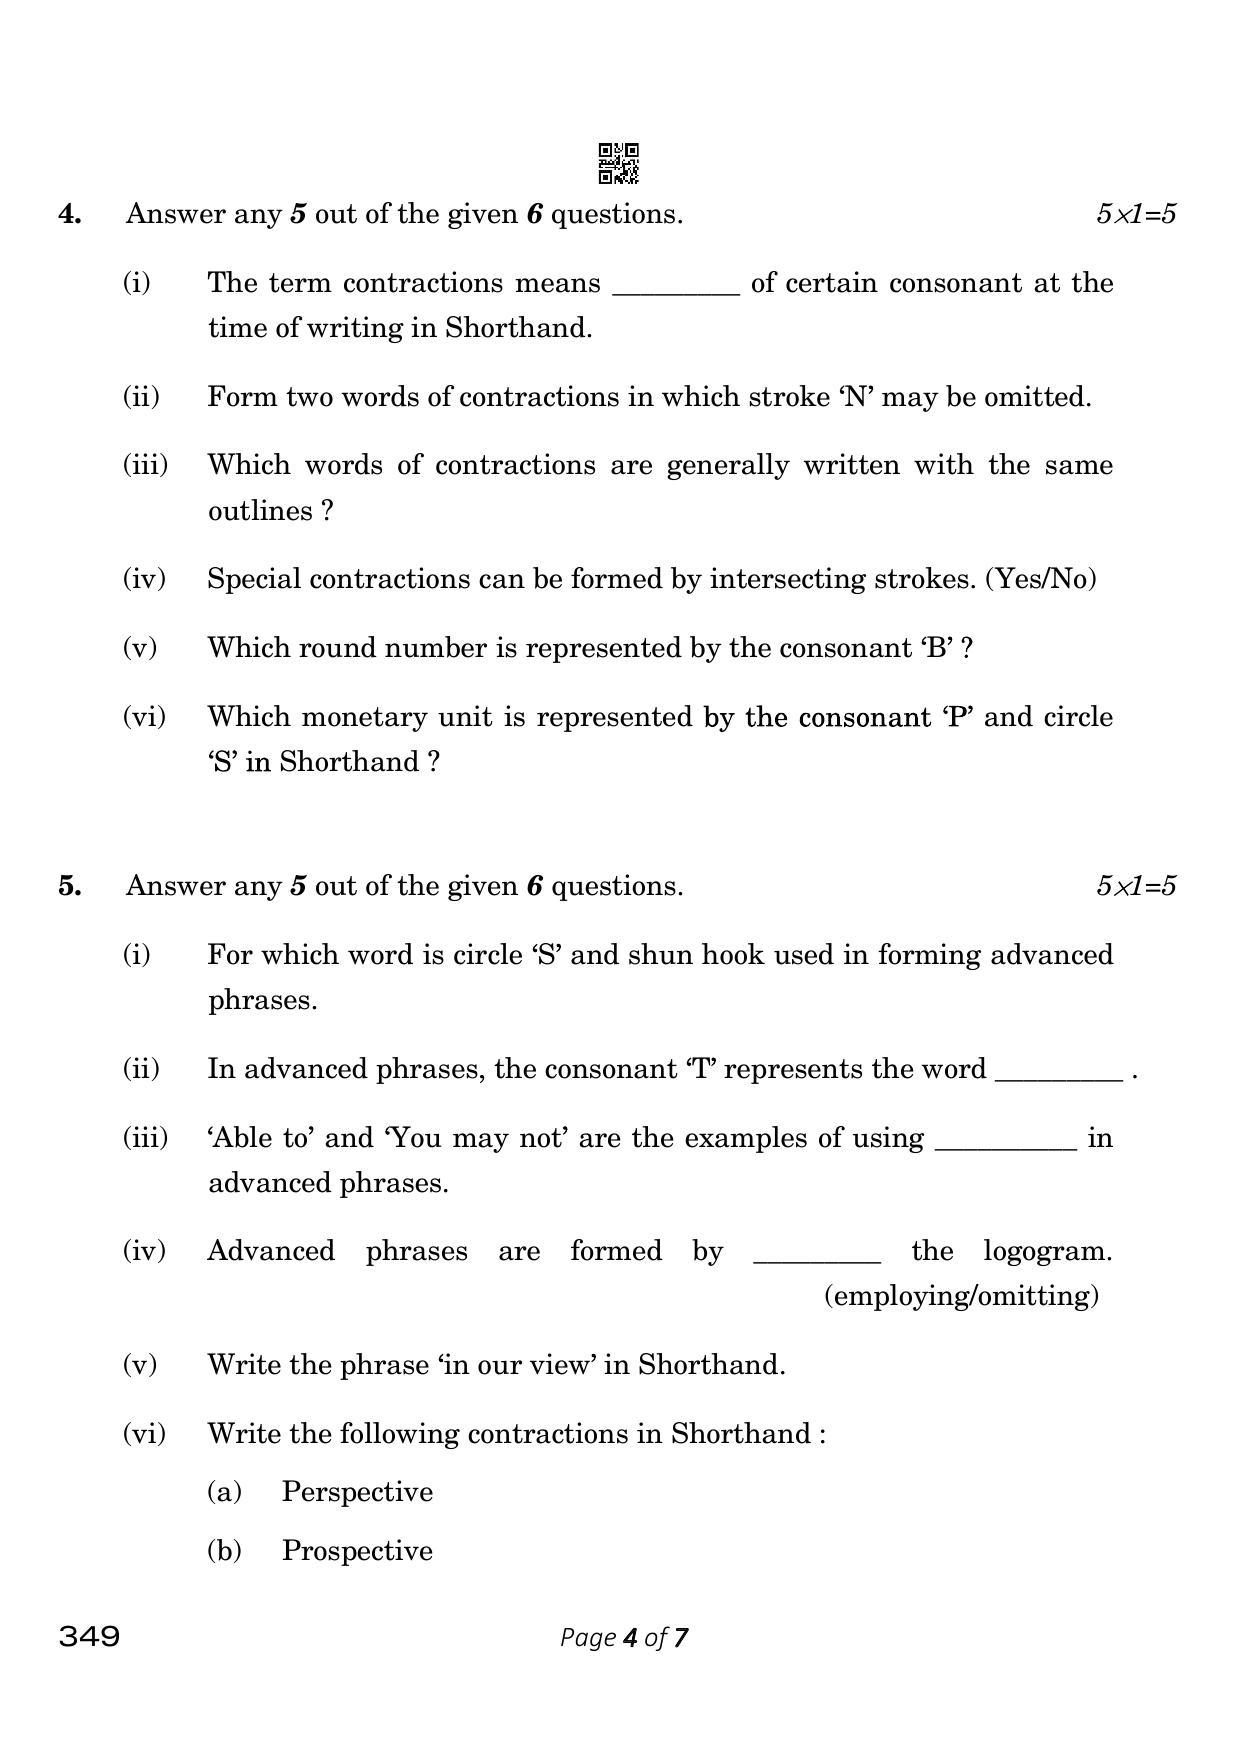 CBSE Class 12 349_Shorthand English 2023 Question Paper - Page 4